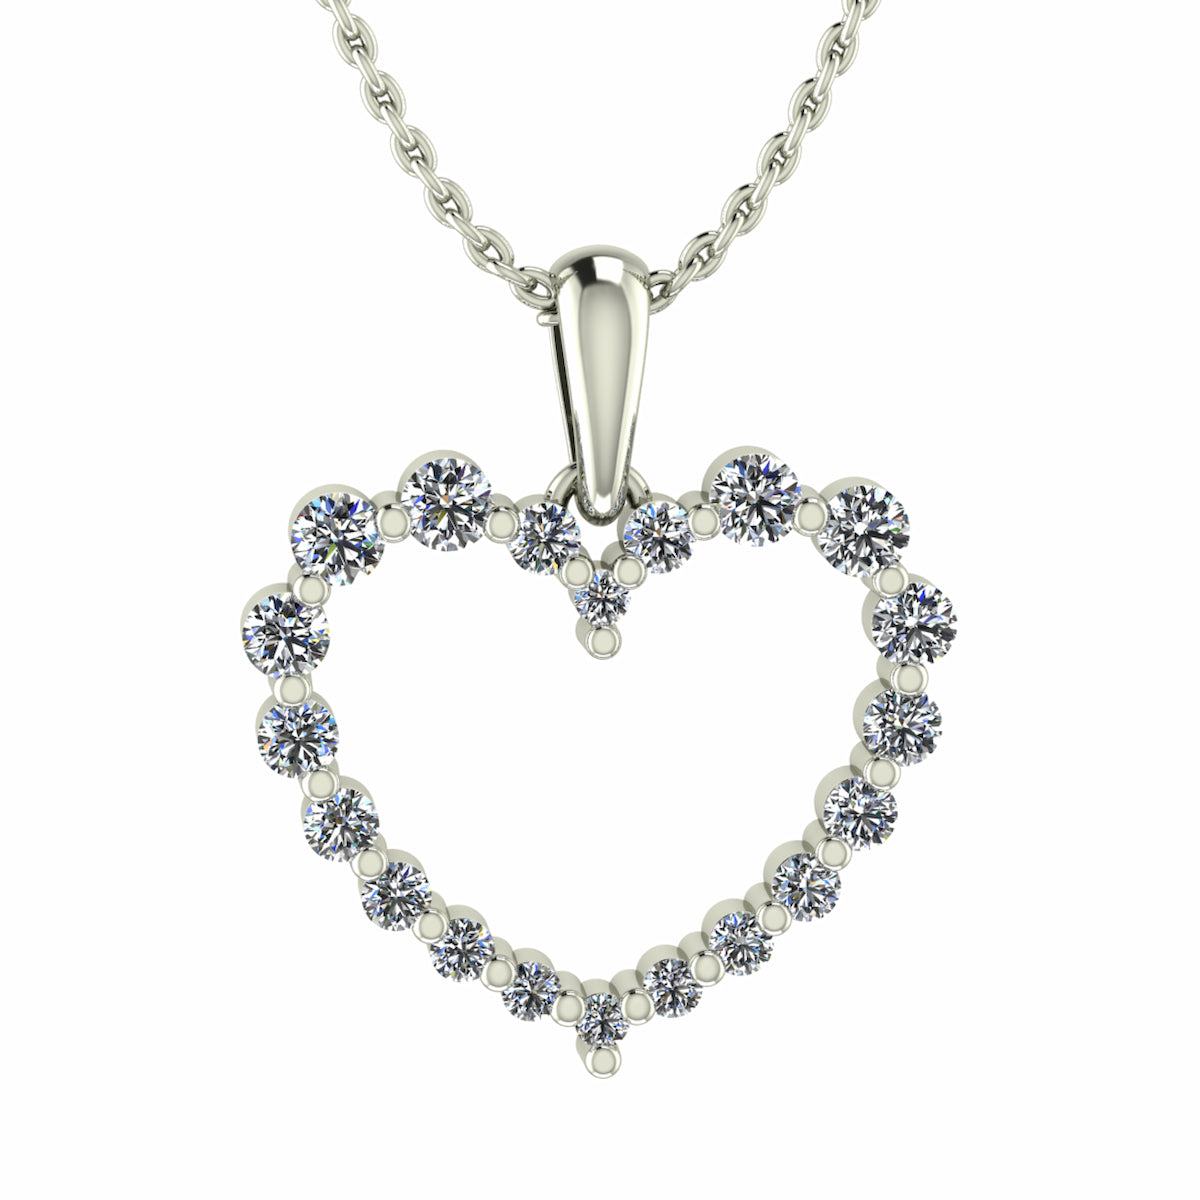 The Queen of Hearts Necklace